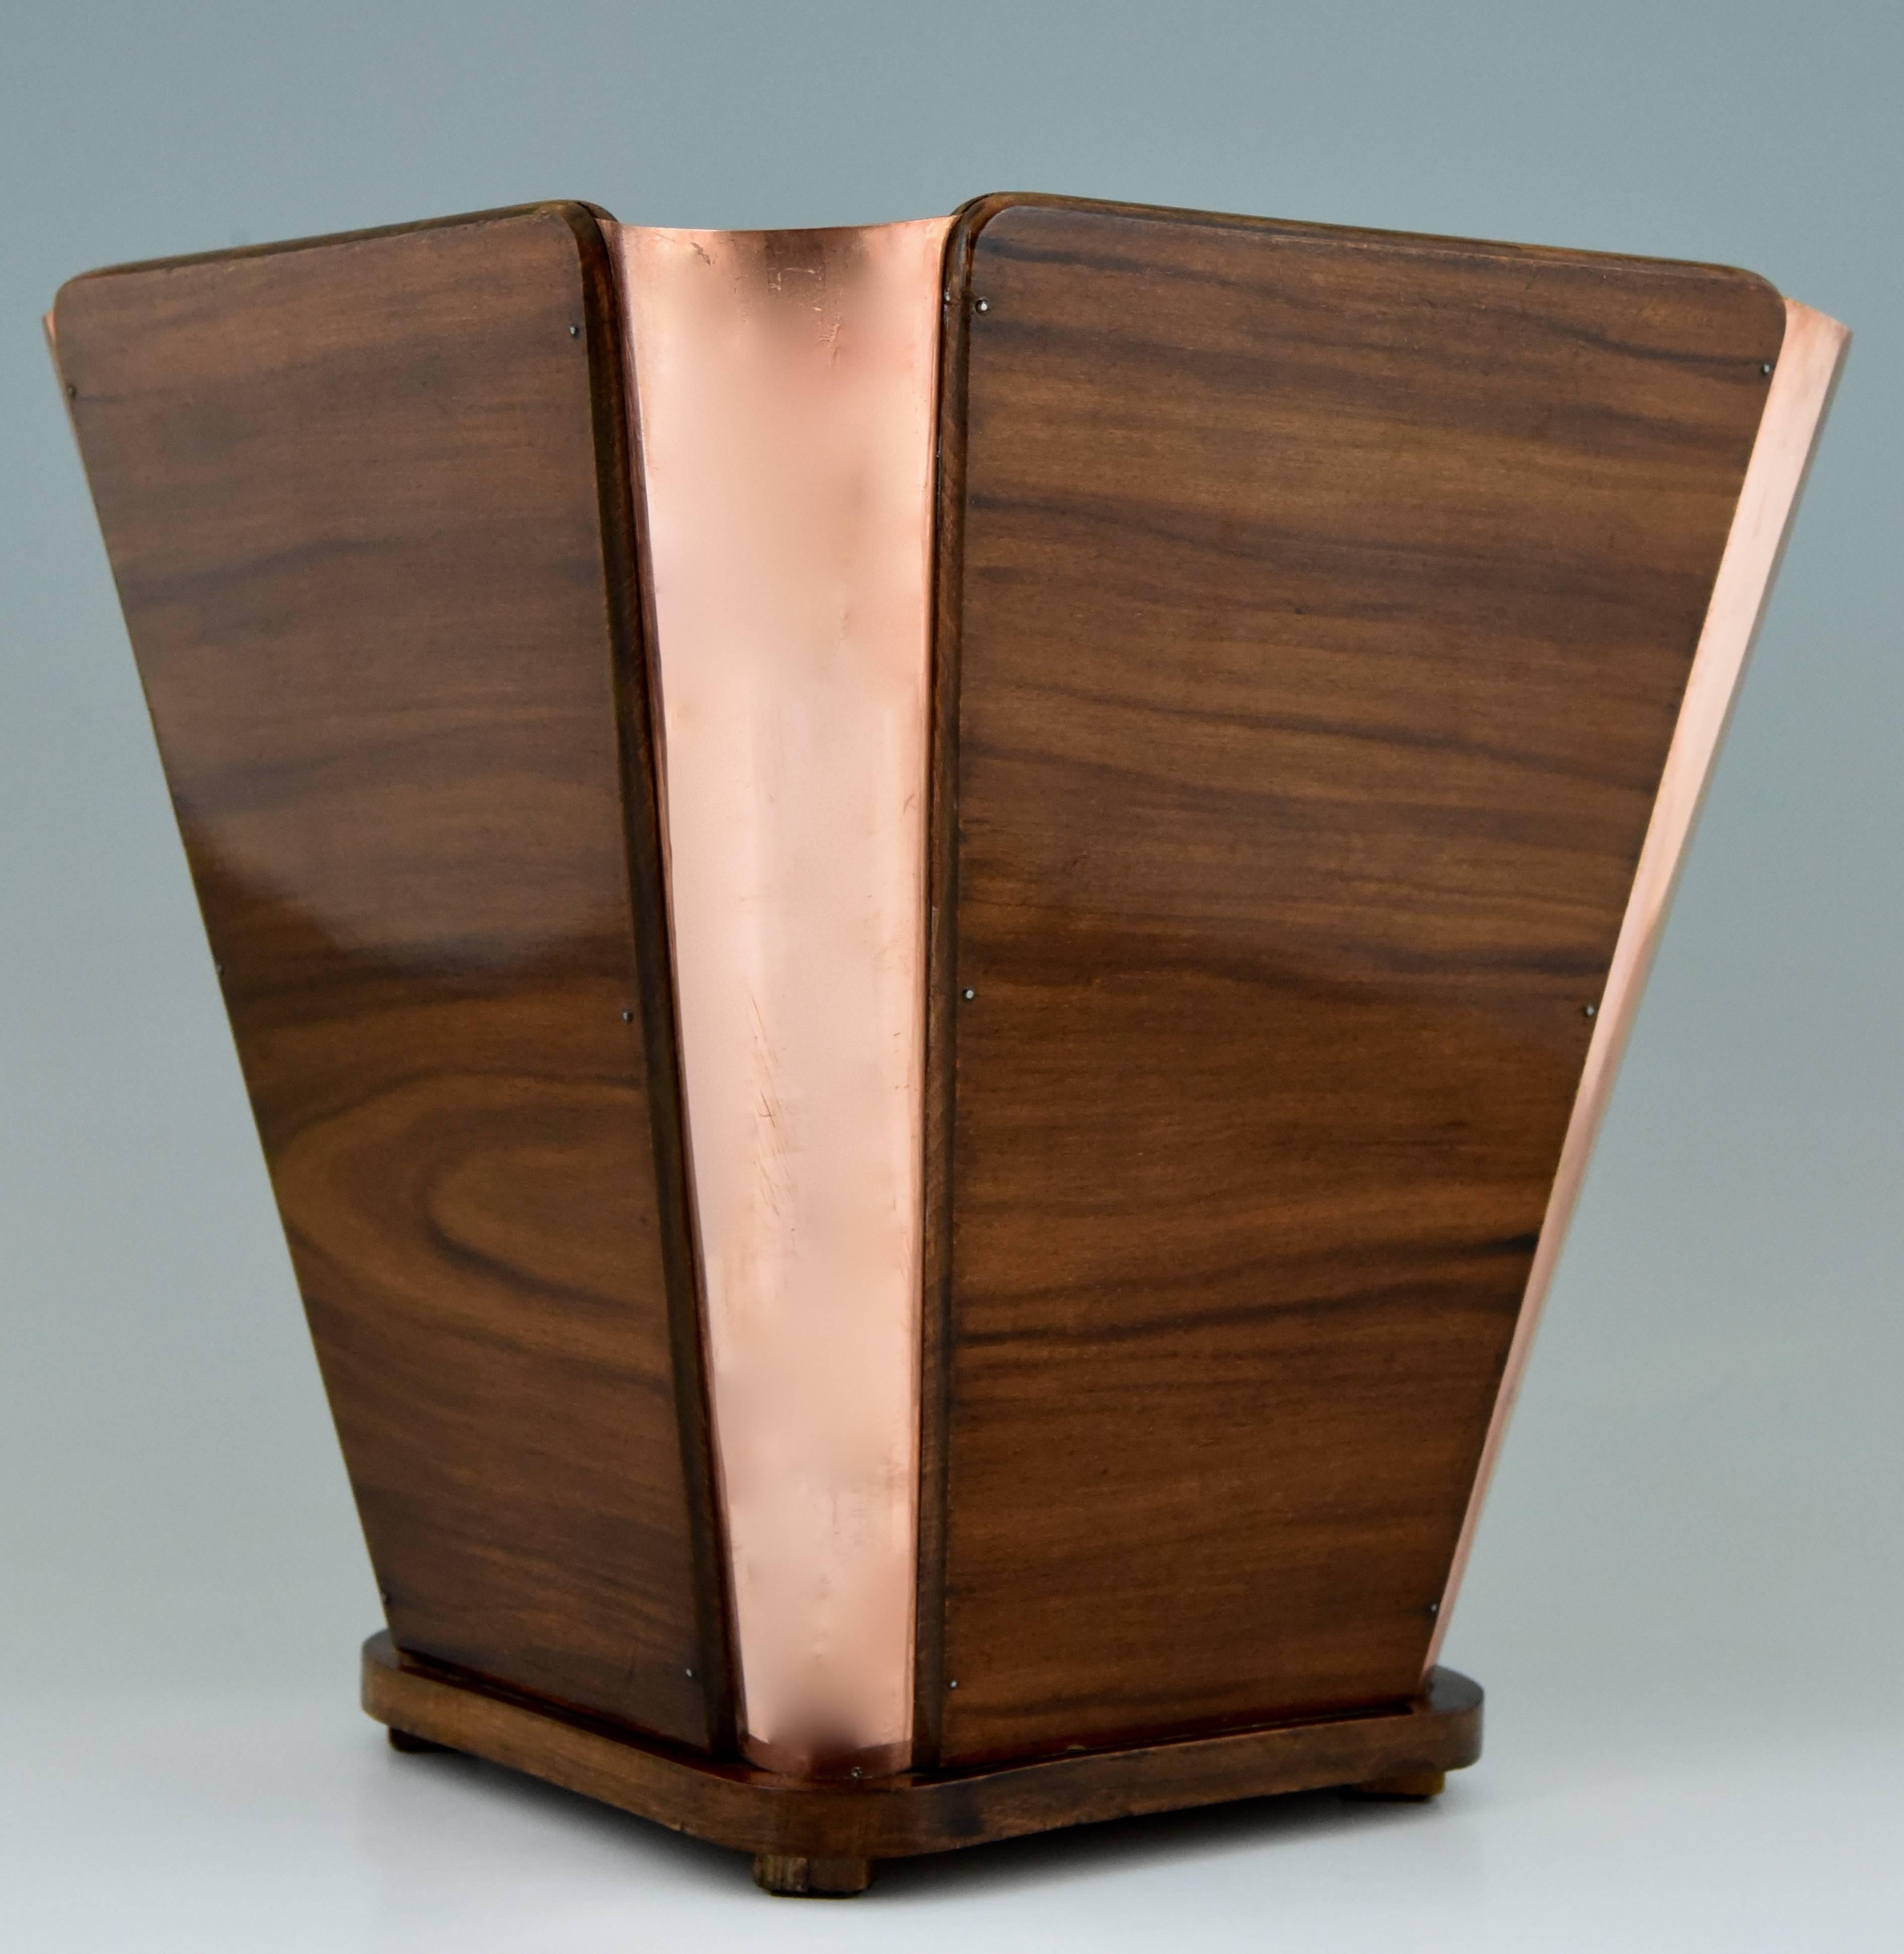 A stylish Art Deco wood and copper waste paper basket by the famous designer Emile Jacques Ruhlmann.

Signature/ marks: Original label from a decorator in Paris.
Style: Art Deco
Date: 1930
Material: Wood and copper.
Origin: France
Size: H